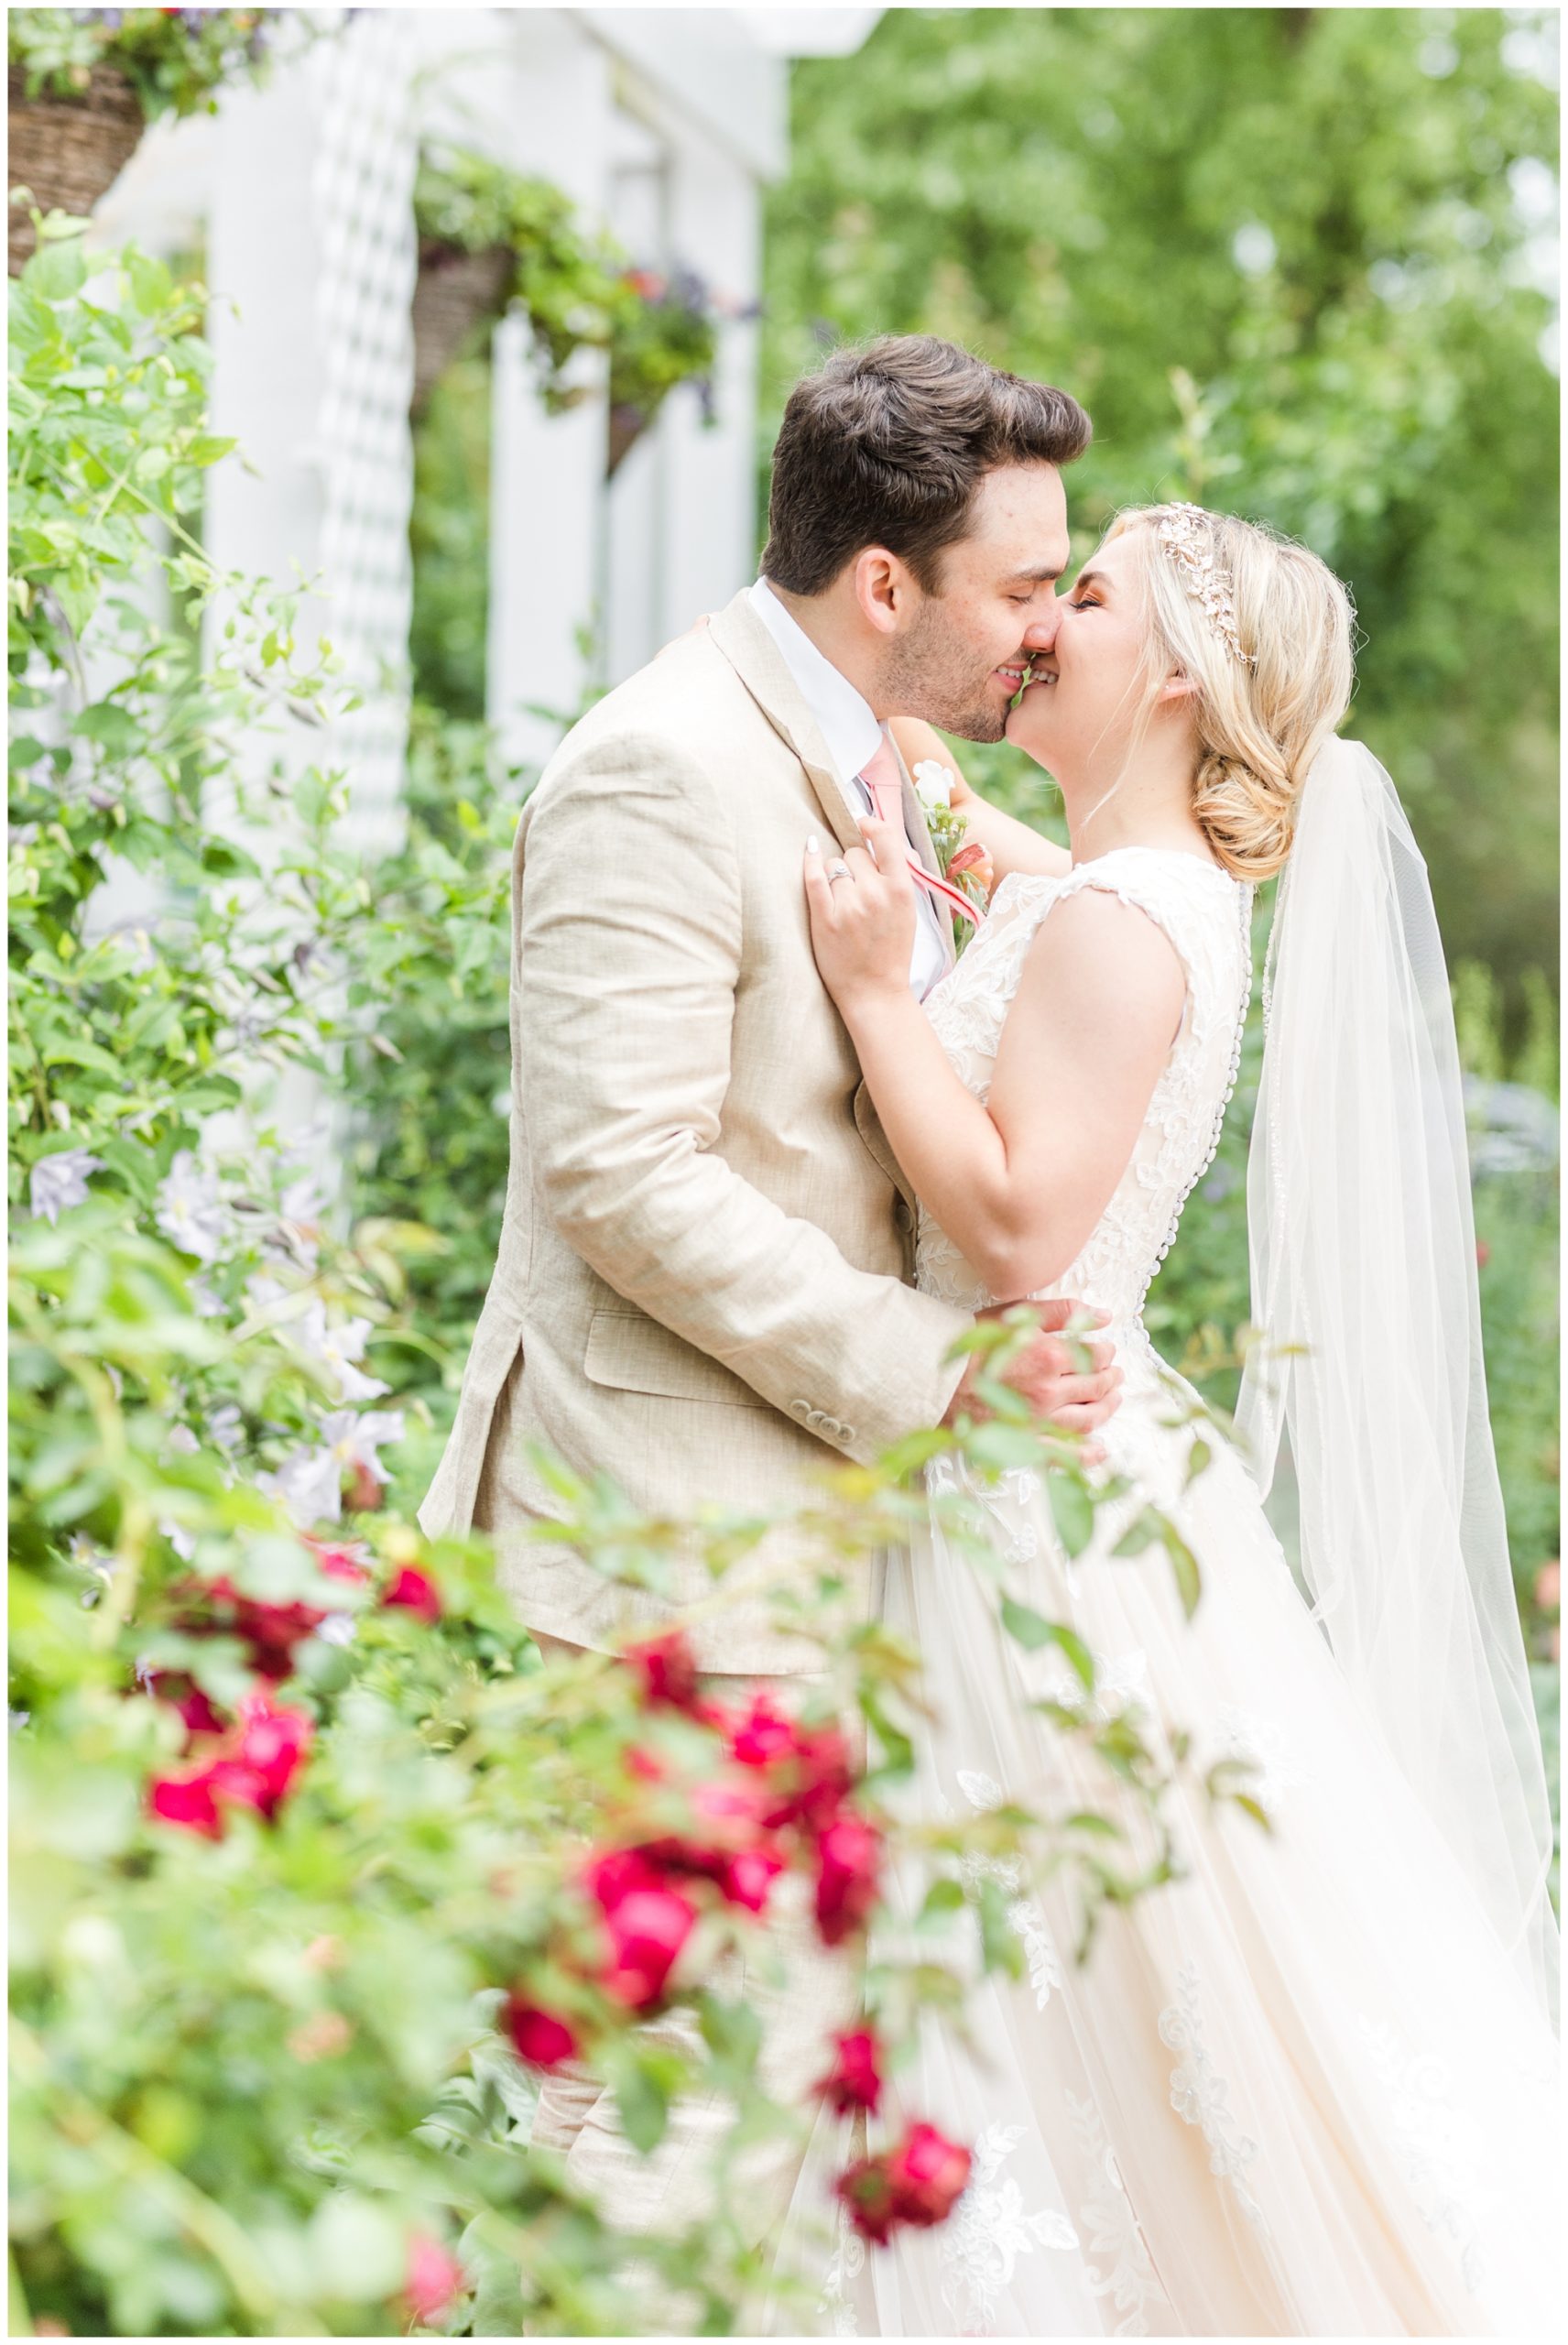 The bride and groom kiss in a portrait. 